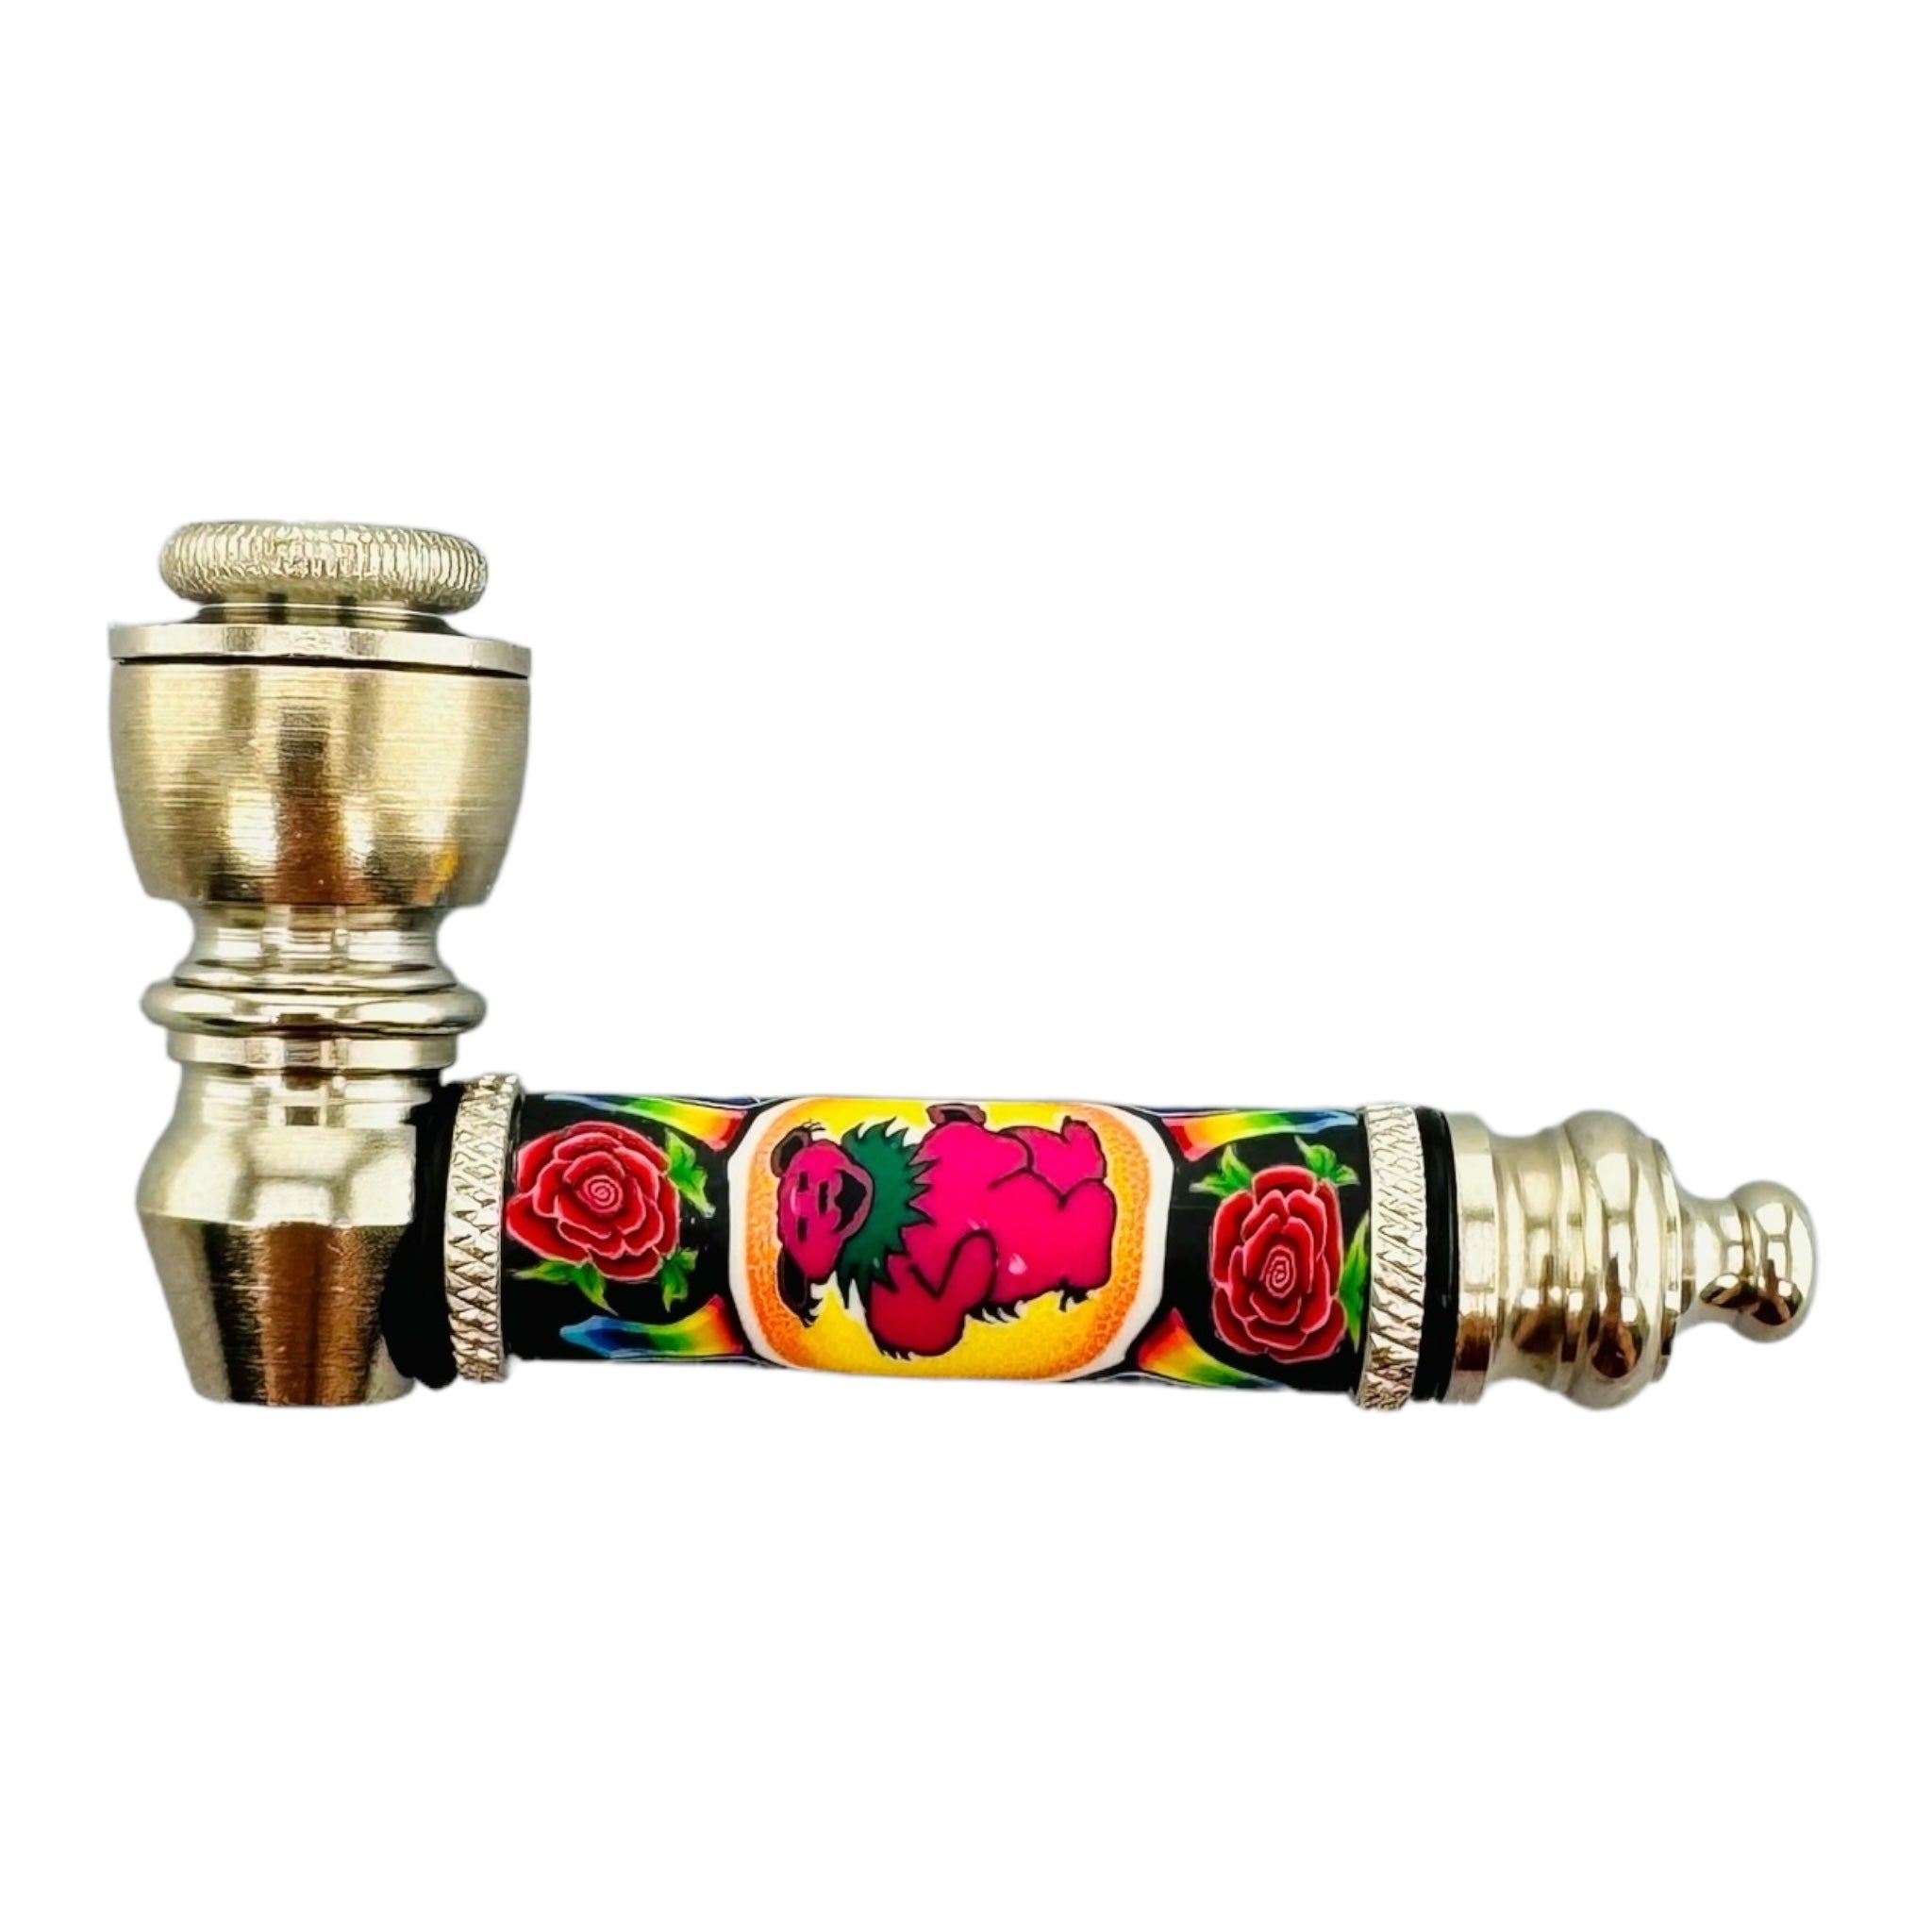 Metal Hand Pipes - Silver Chrome Hand Pipe With Dancing Bear And Flowers